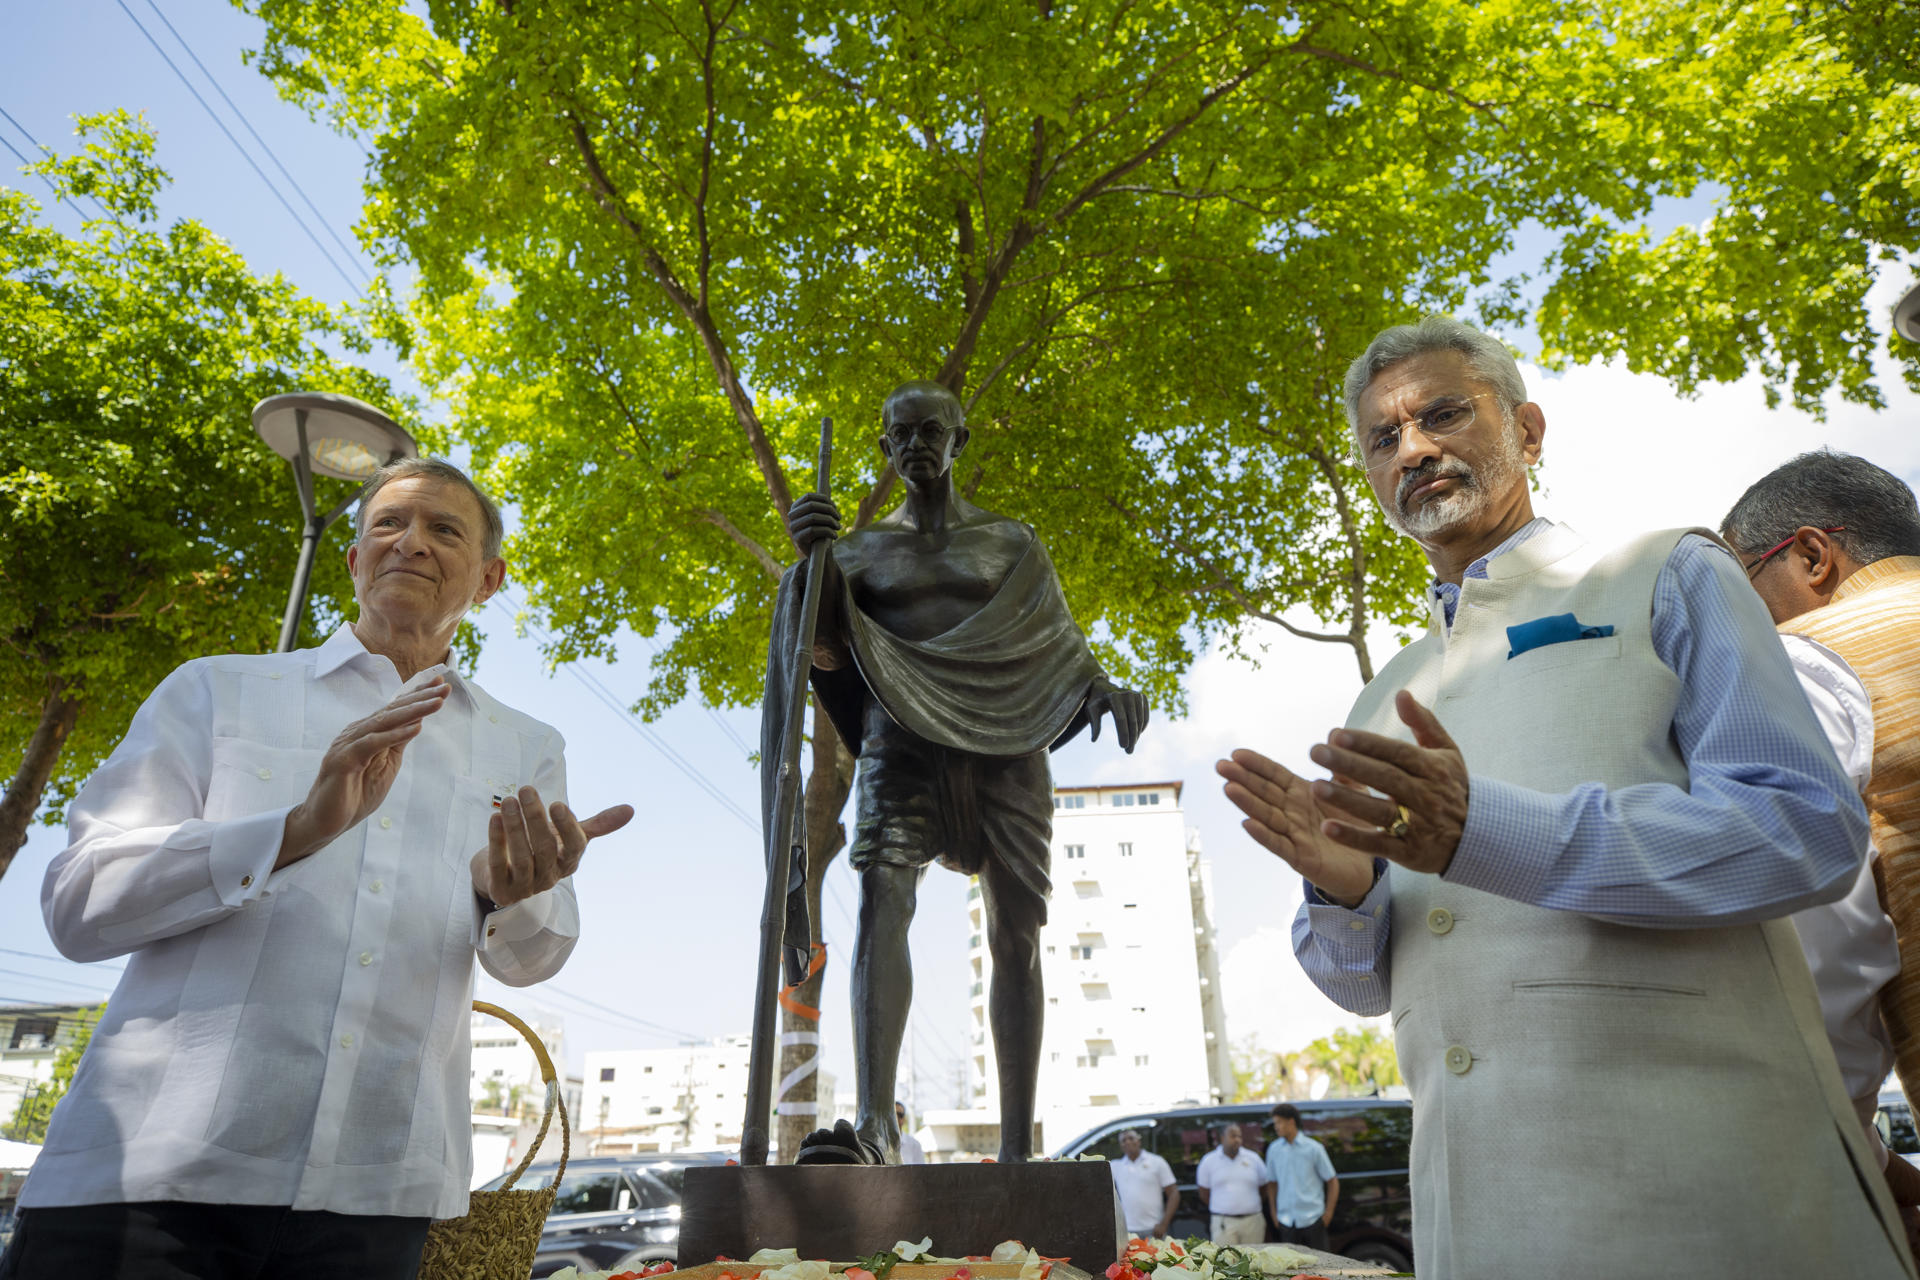 India's foreign minister, Dr. S. Jaishankar (R) and Dominican counterpart Roberto Alvarez, take part in the unveiling of a statue of Mahatma Gandhi in Santo Domingo on 29 April 2023. EFE/Orlando Barría